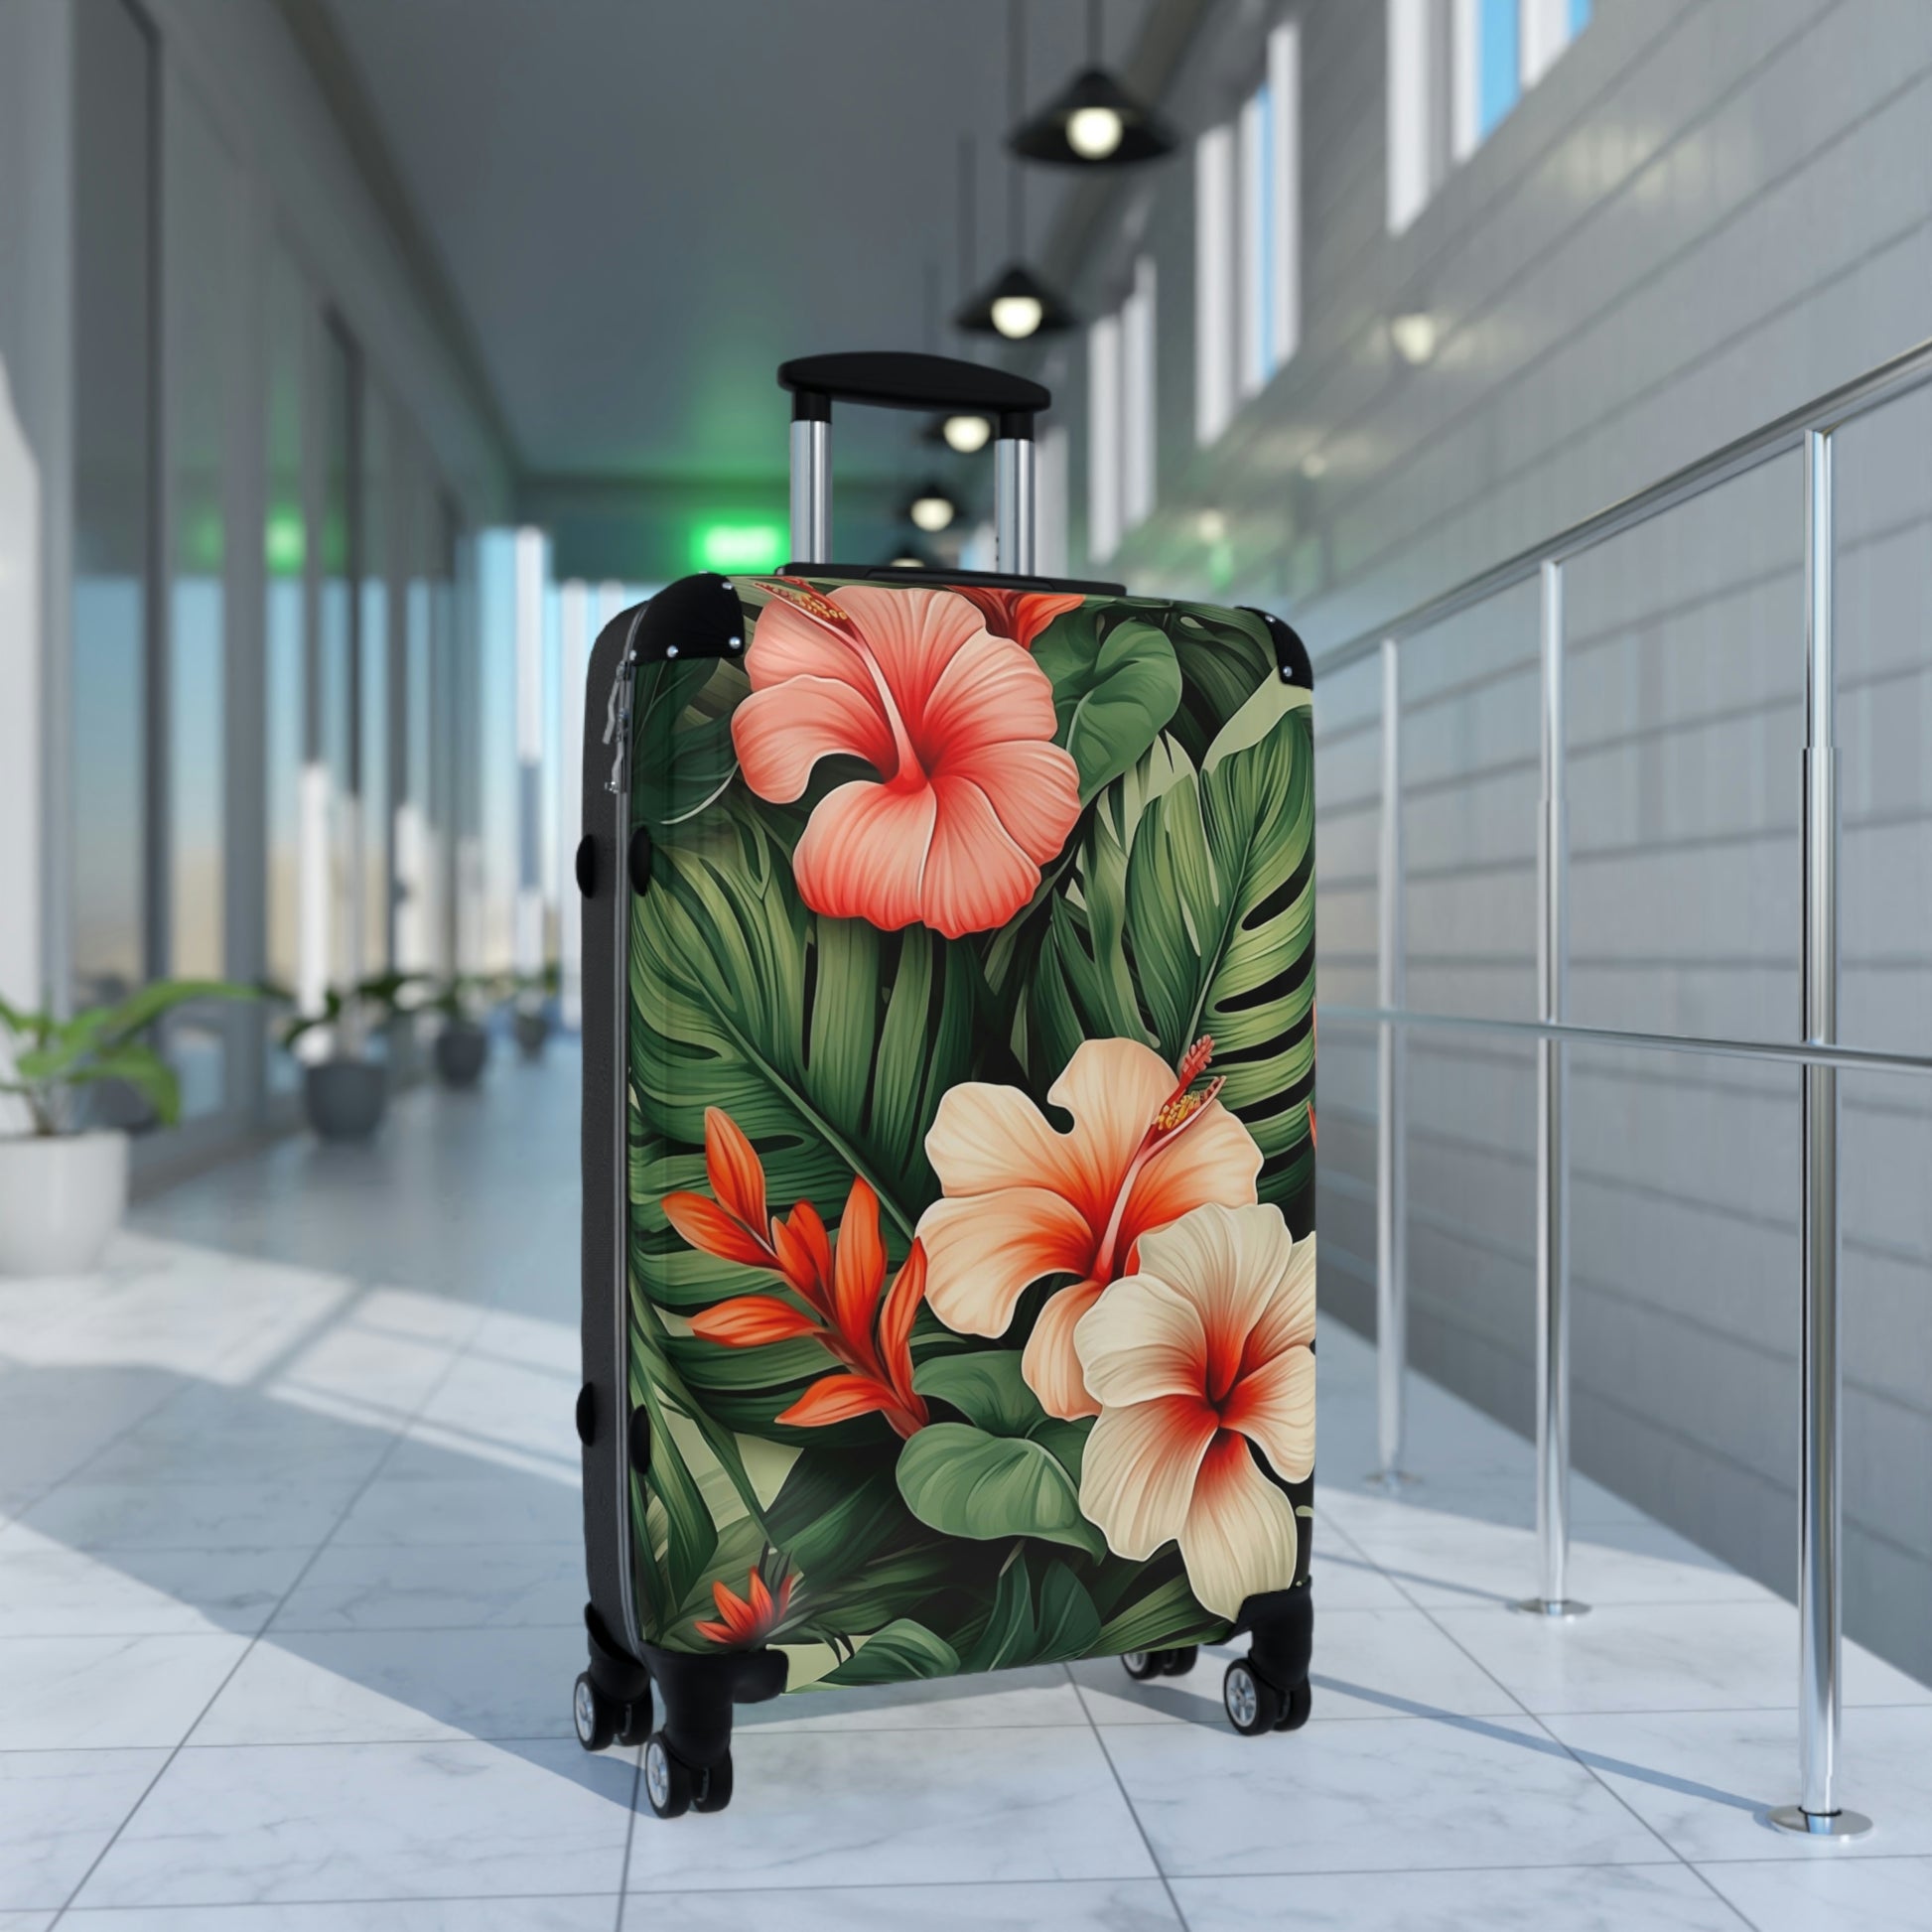 Tropical Suitcase Luggage, Flowers Floral Carry On With 4 Wheels Cabin Travel Small Large Set Rolling Spinner Designer Hard Shell Case Starcove Fashion